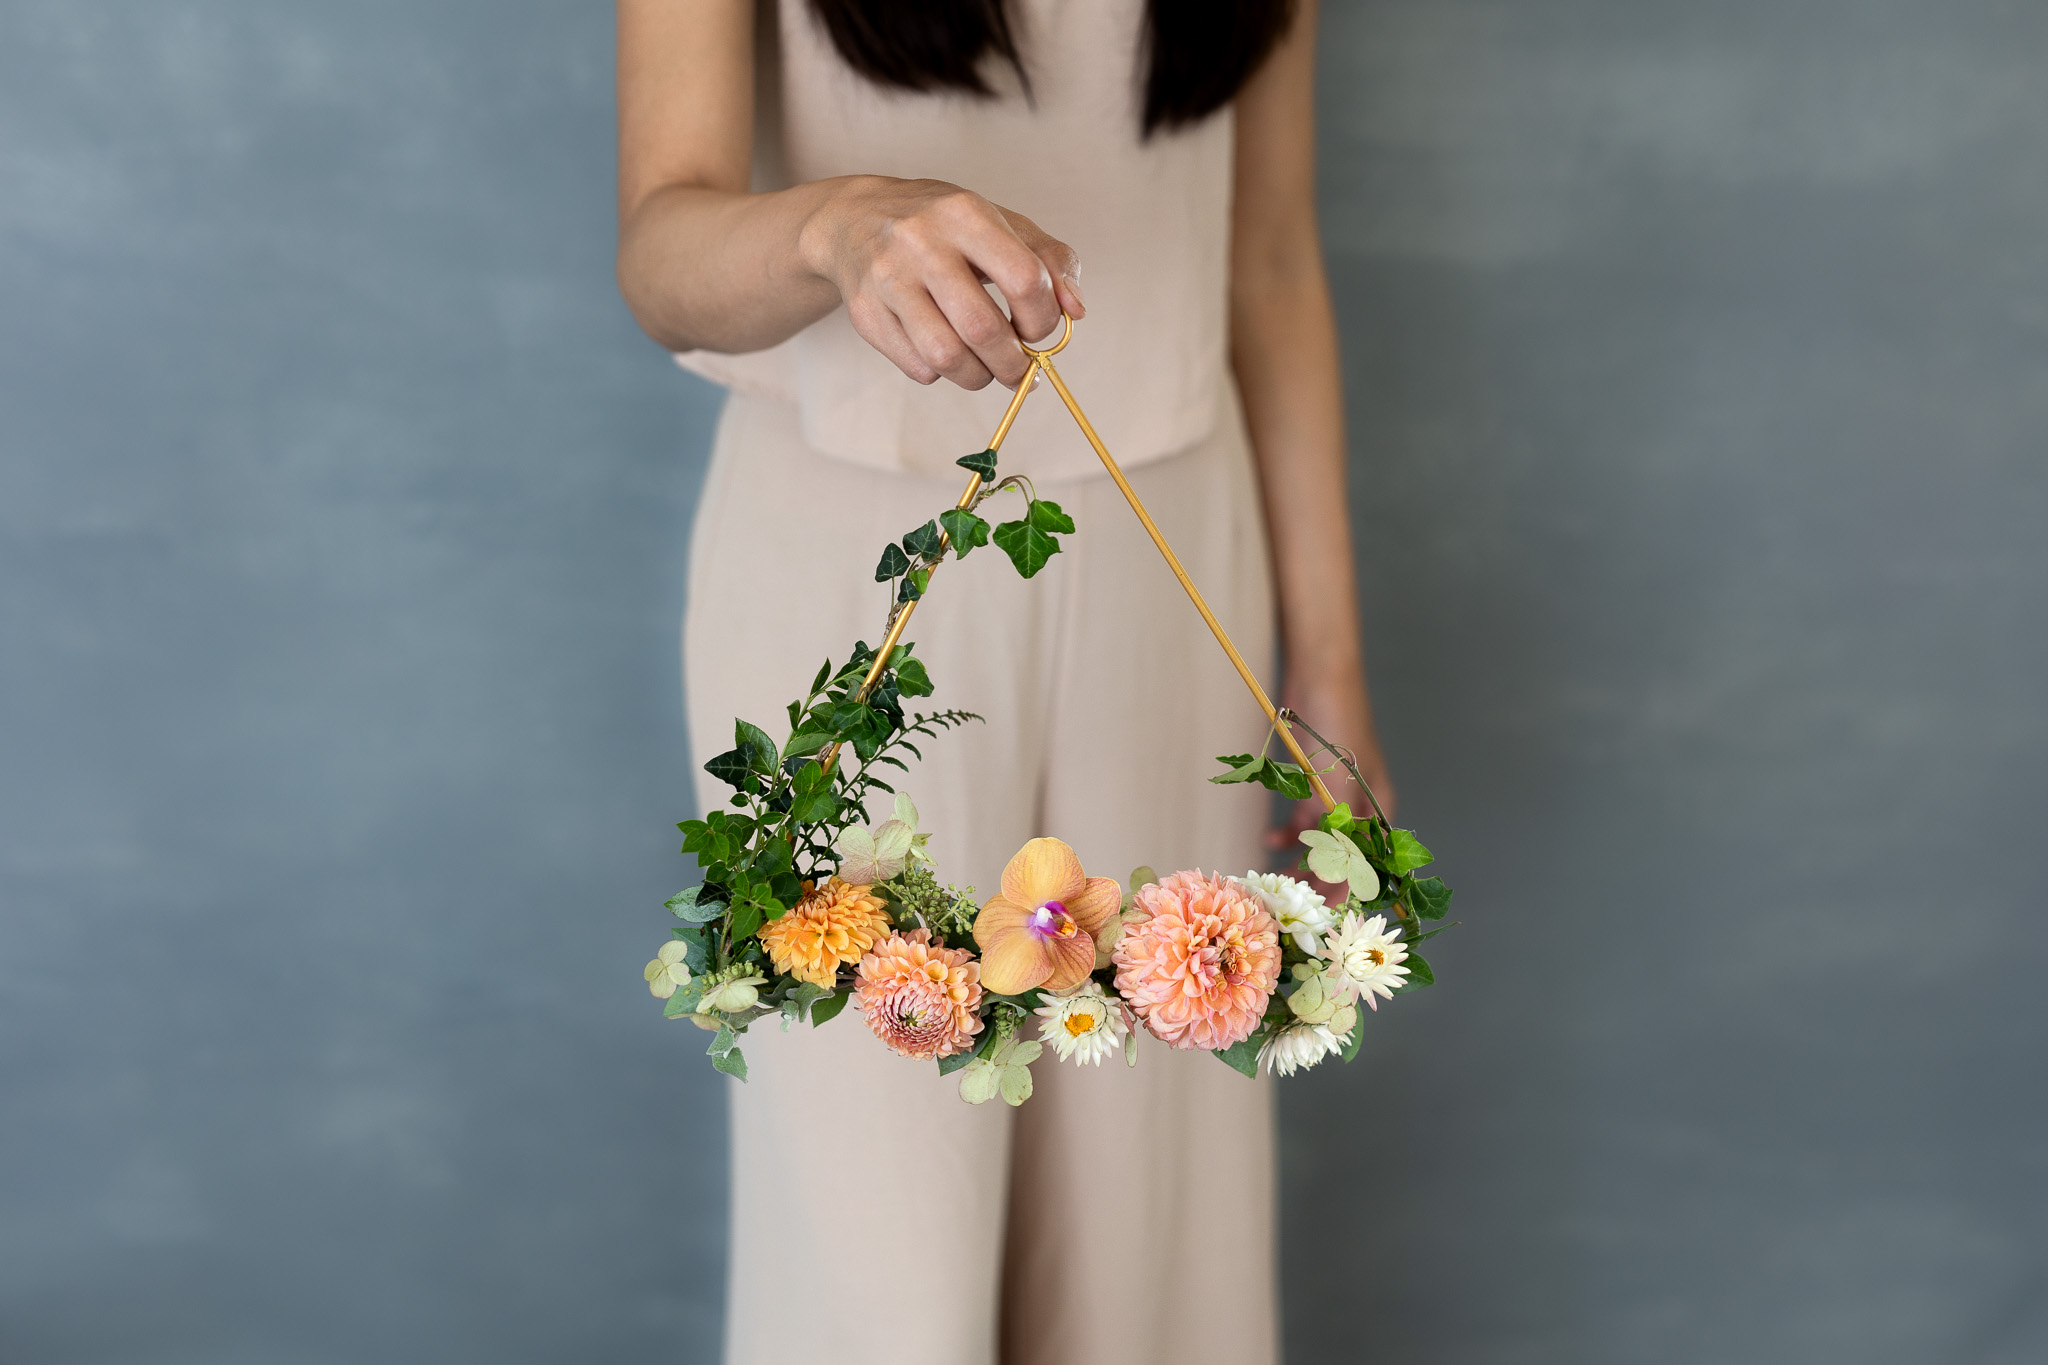 Bouquet recipe and tips for wedding bouquet with a triangle hoop for unique weddings